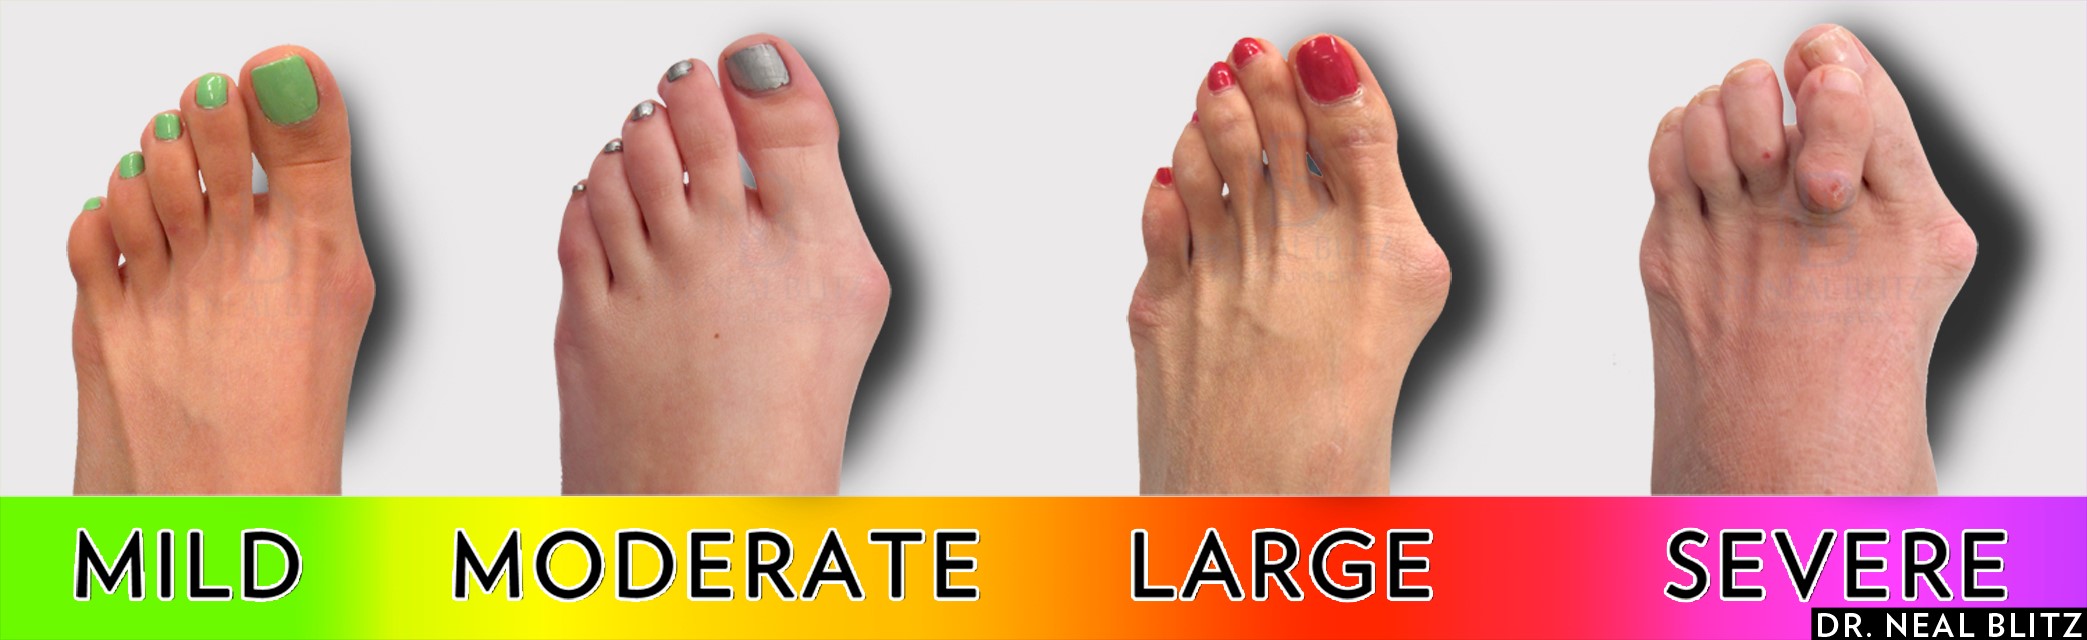 stages of a bunion